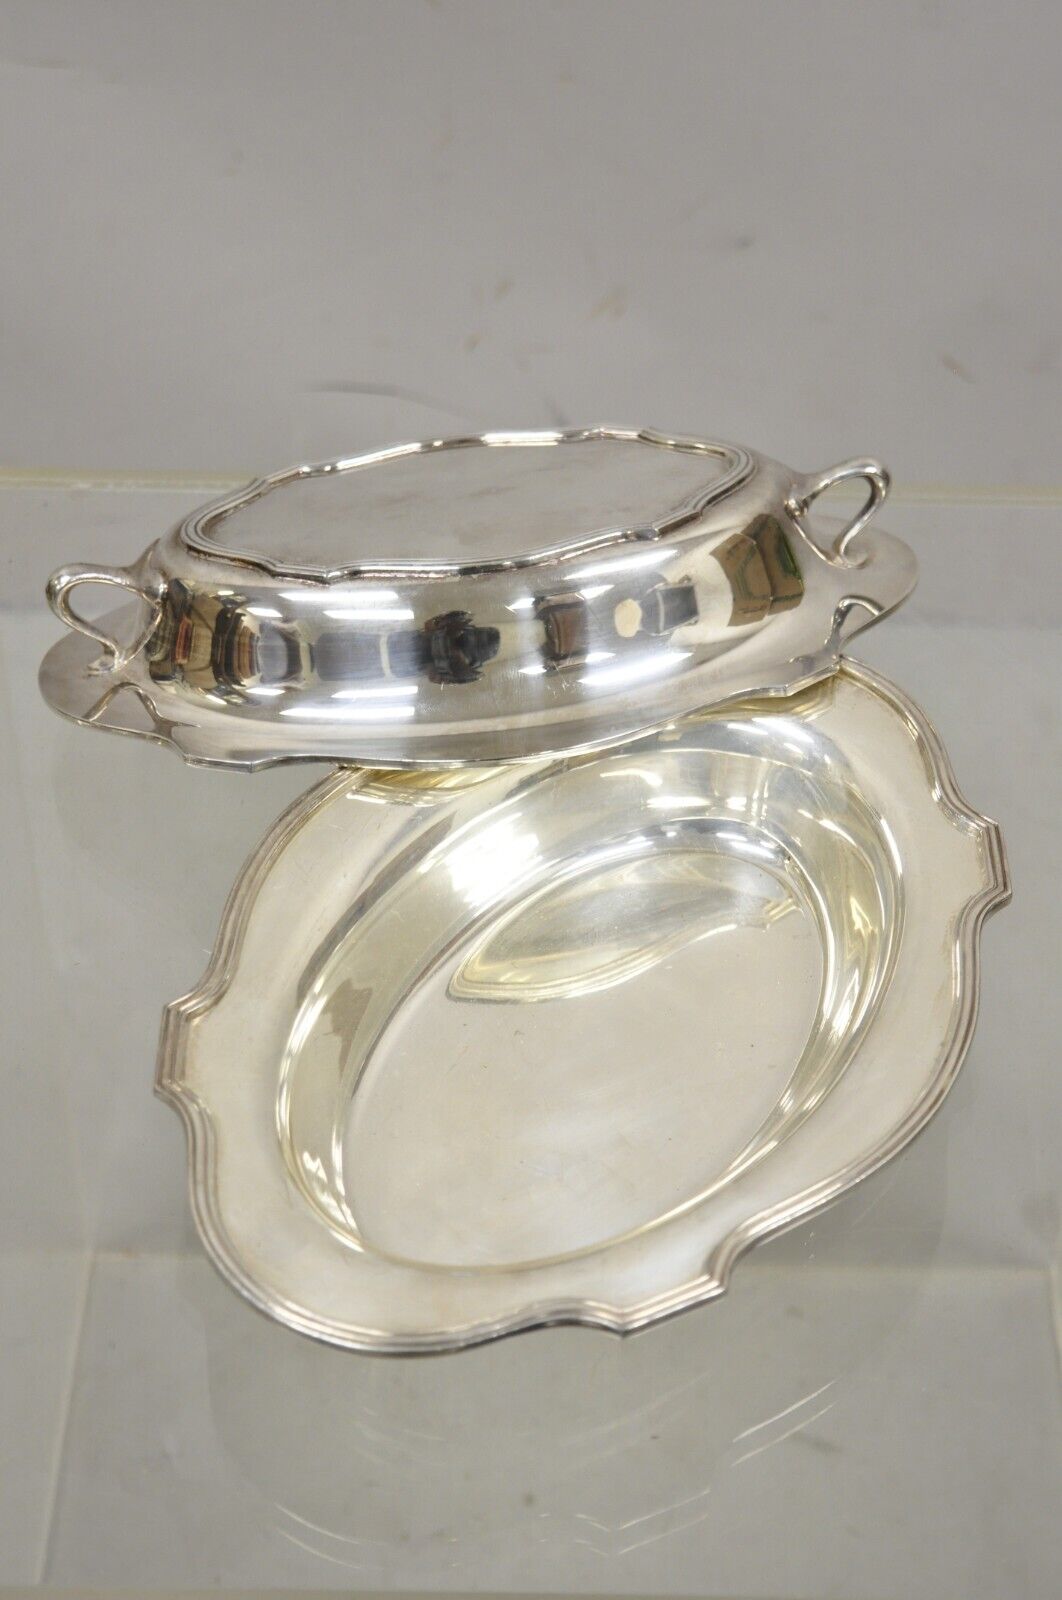 LBS Co English Regency Style Silver Plated Covered Serving Dish Vegetable Bowl